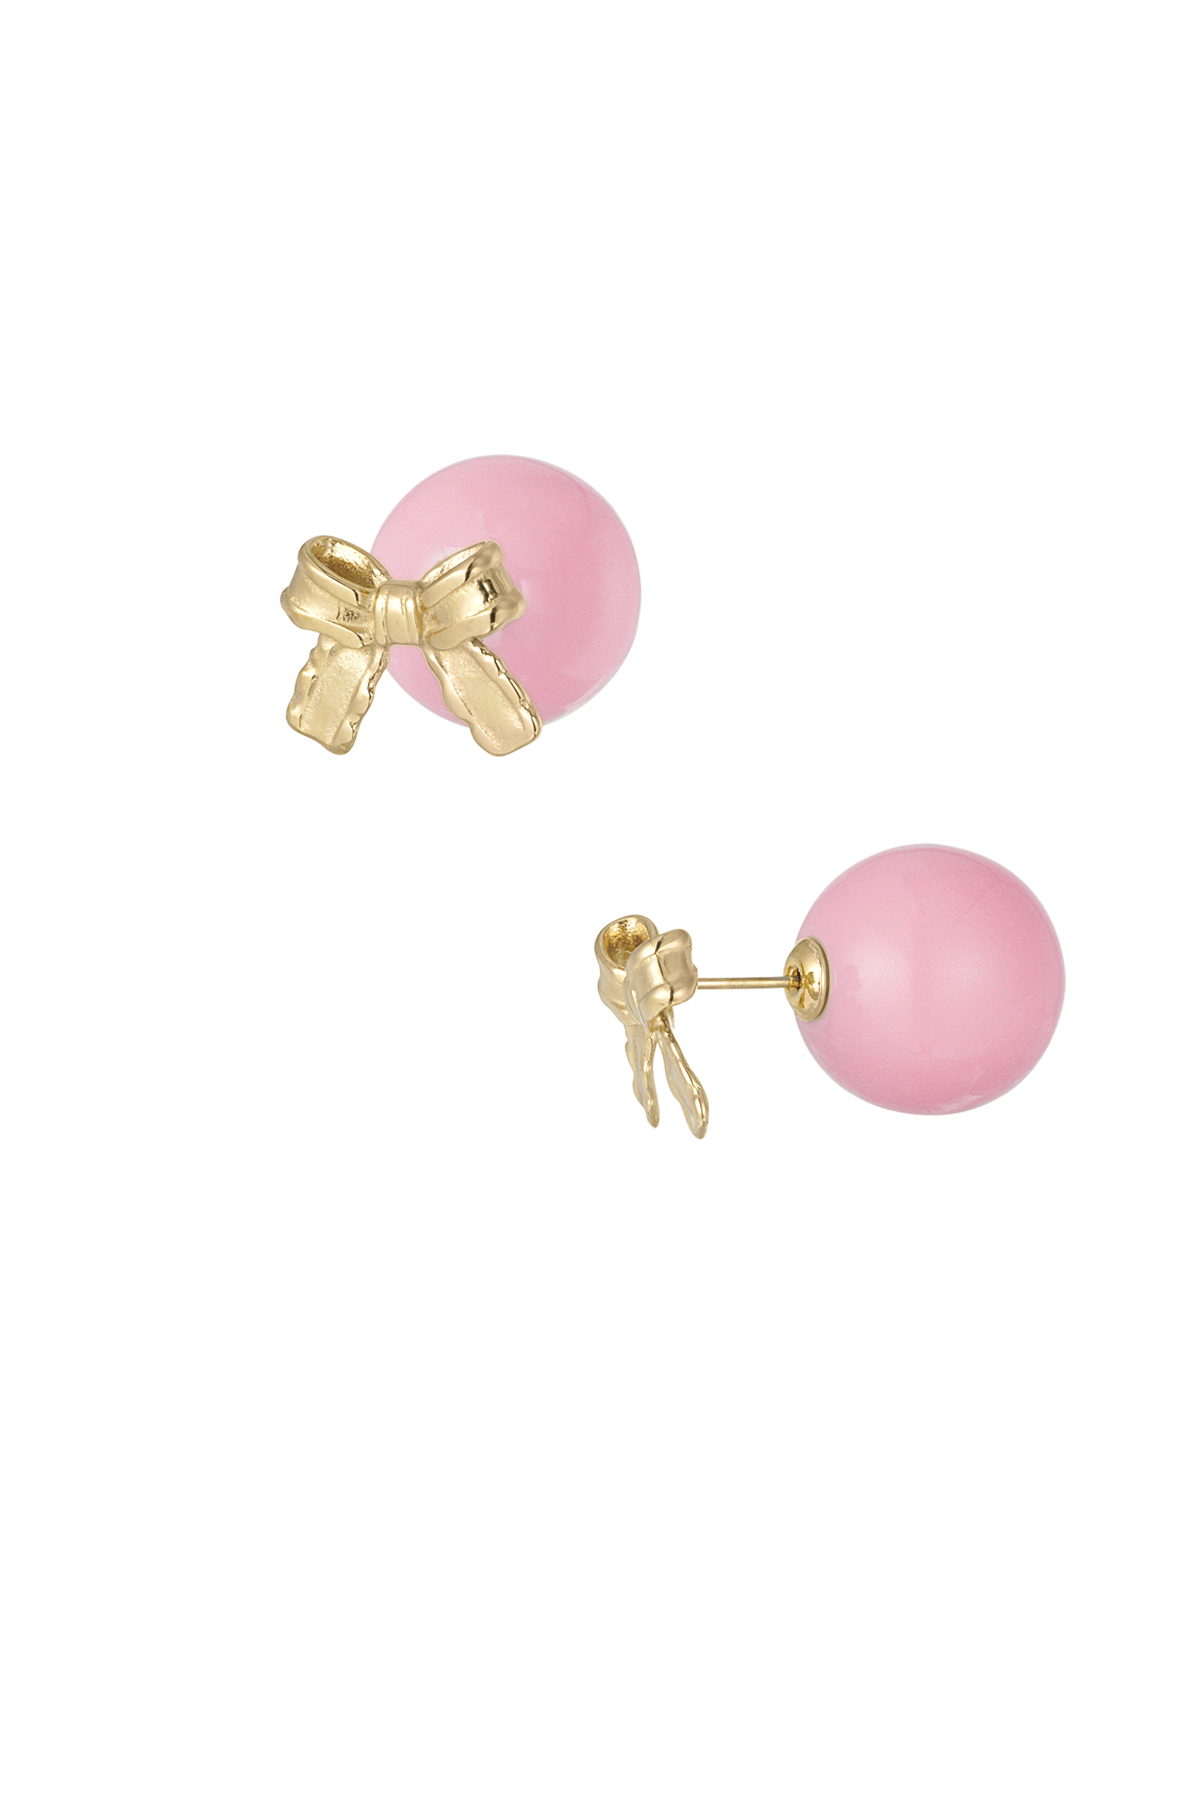 Earrings baby boo bow - pink